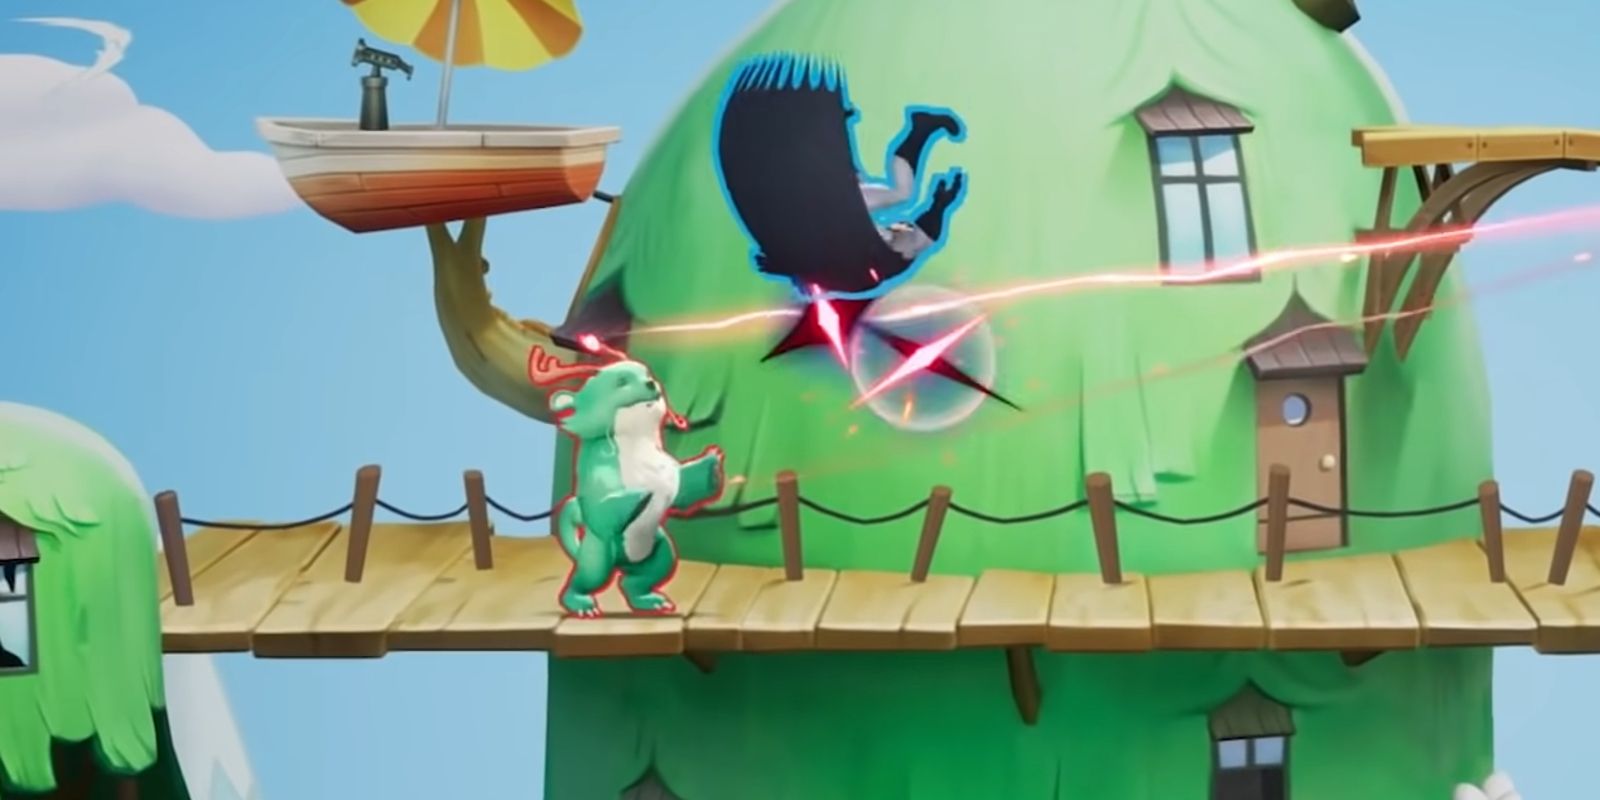 Reindog firing a beat at Batman on the treehouse in MultiVersus